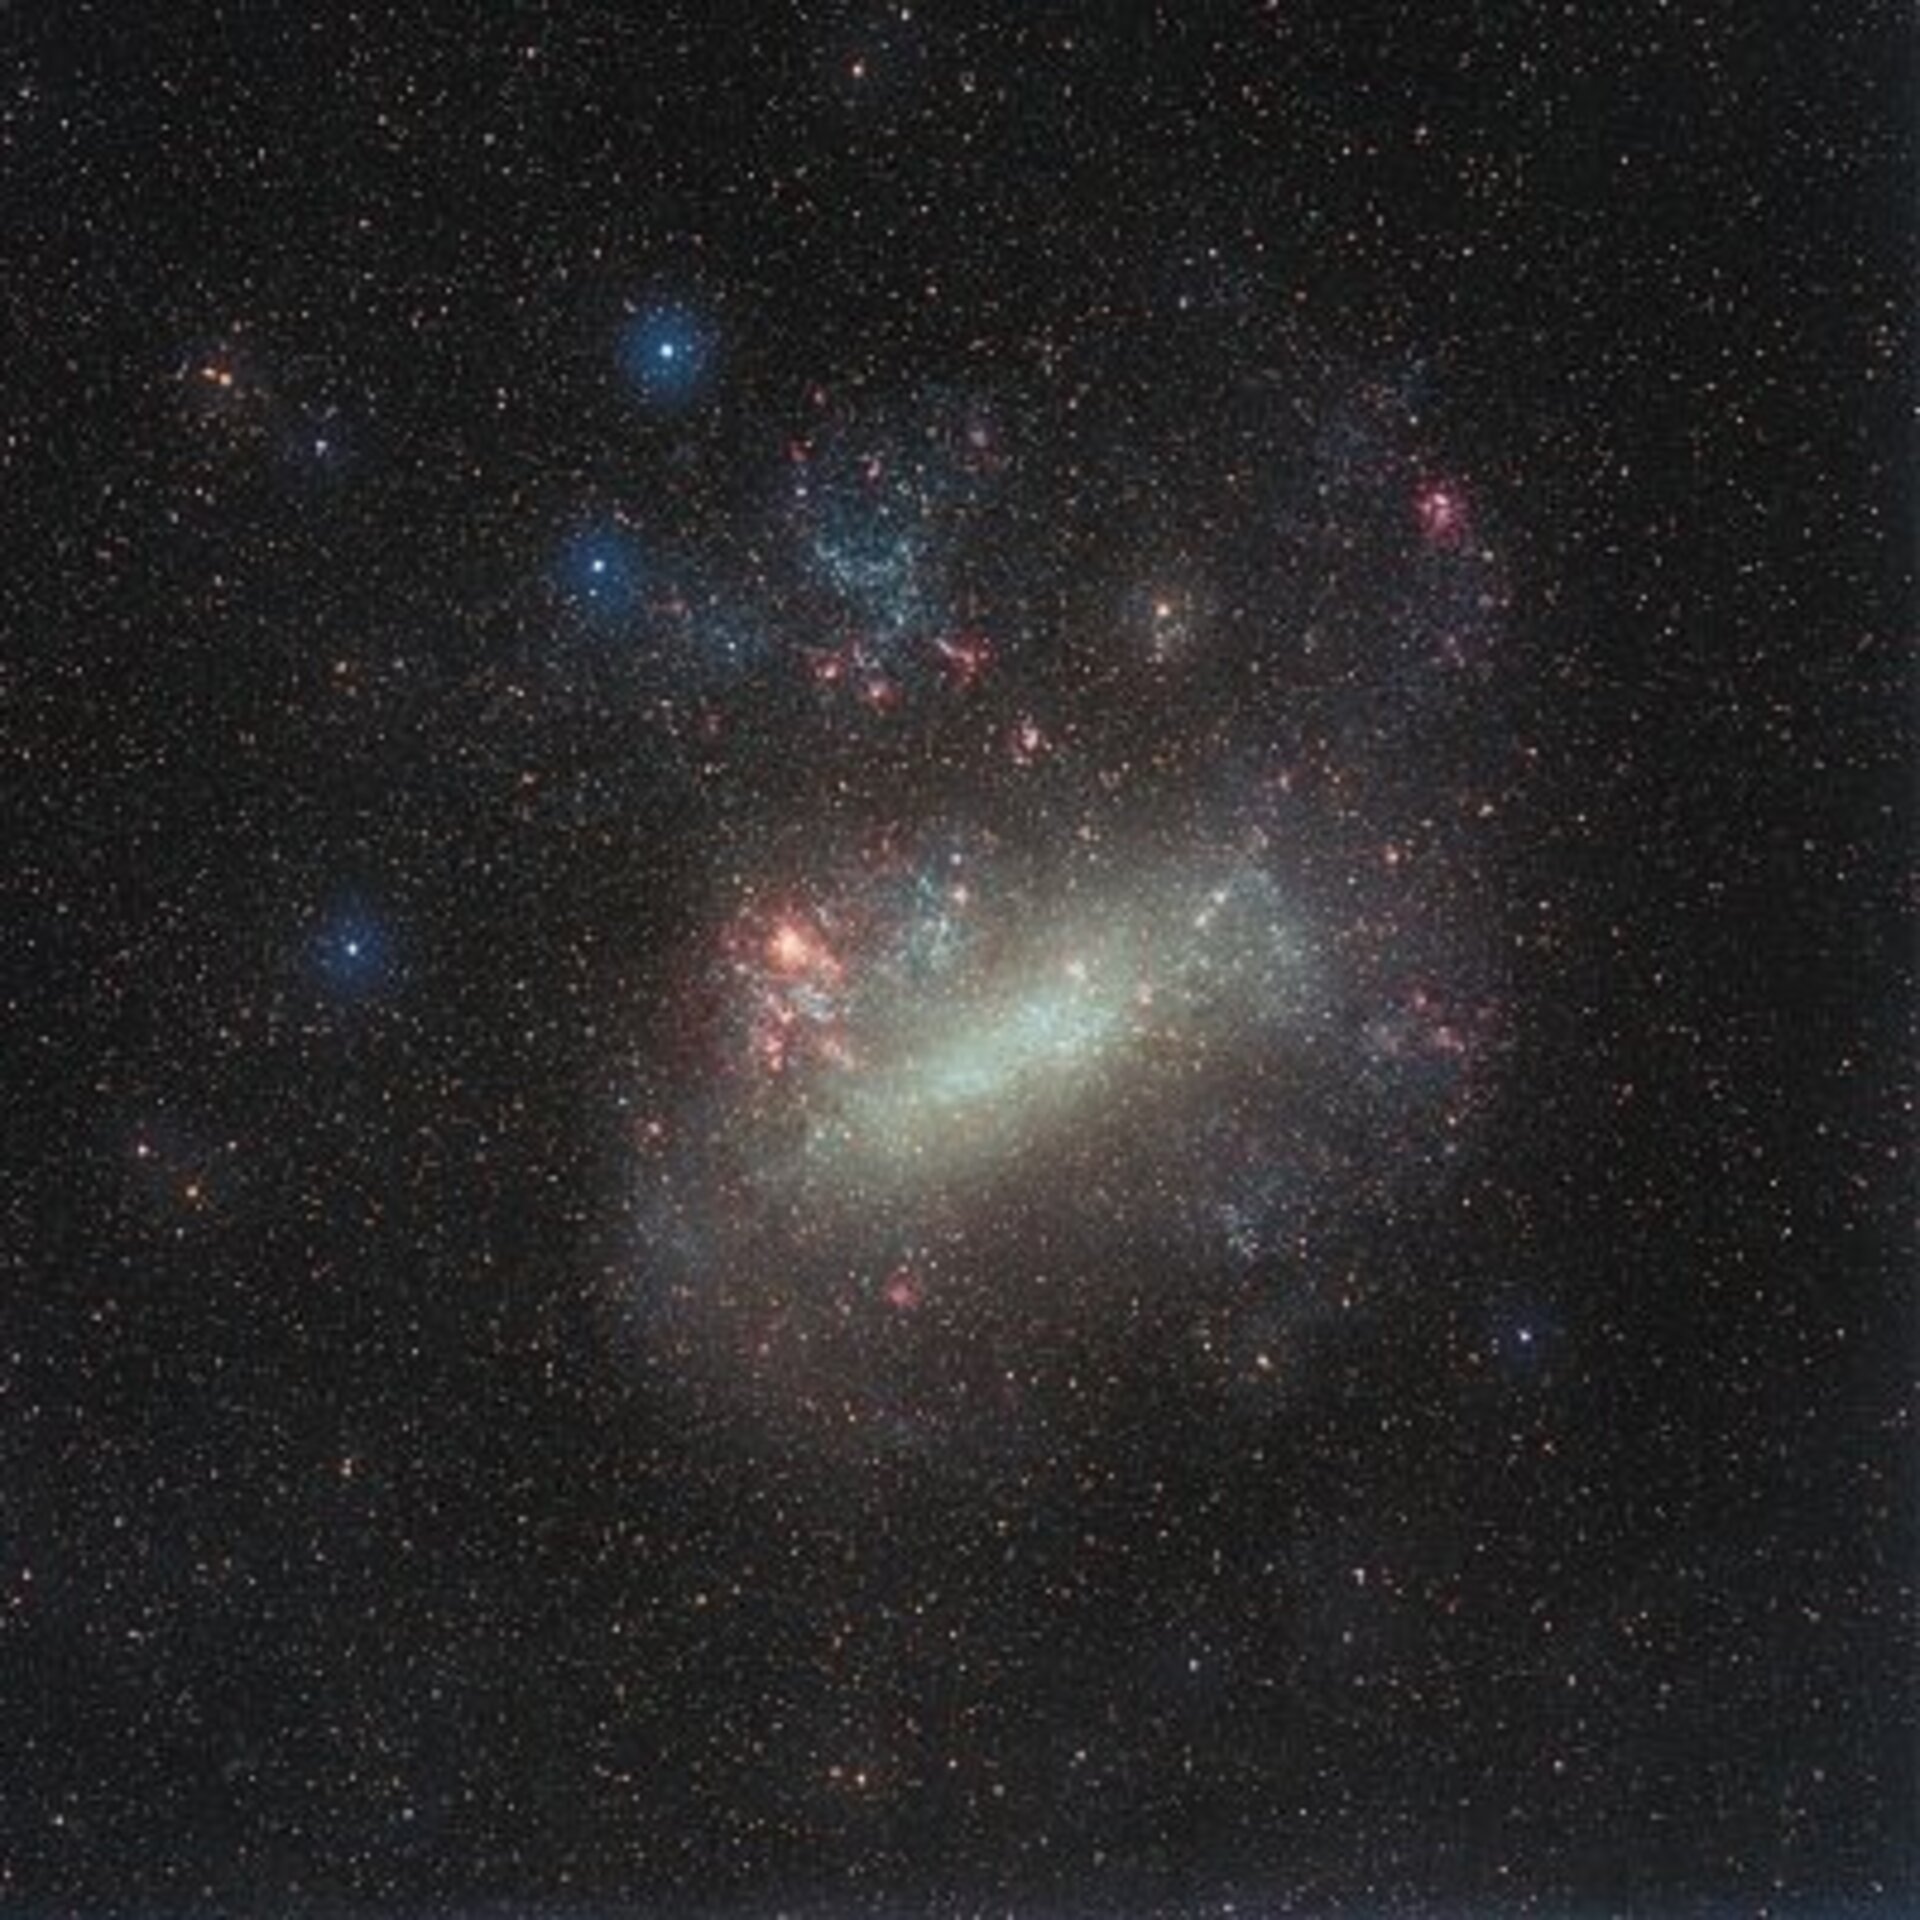 Ground-based view of the Large Magellanic Cloud